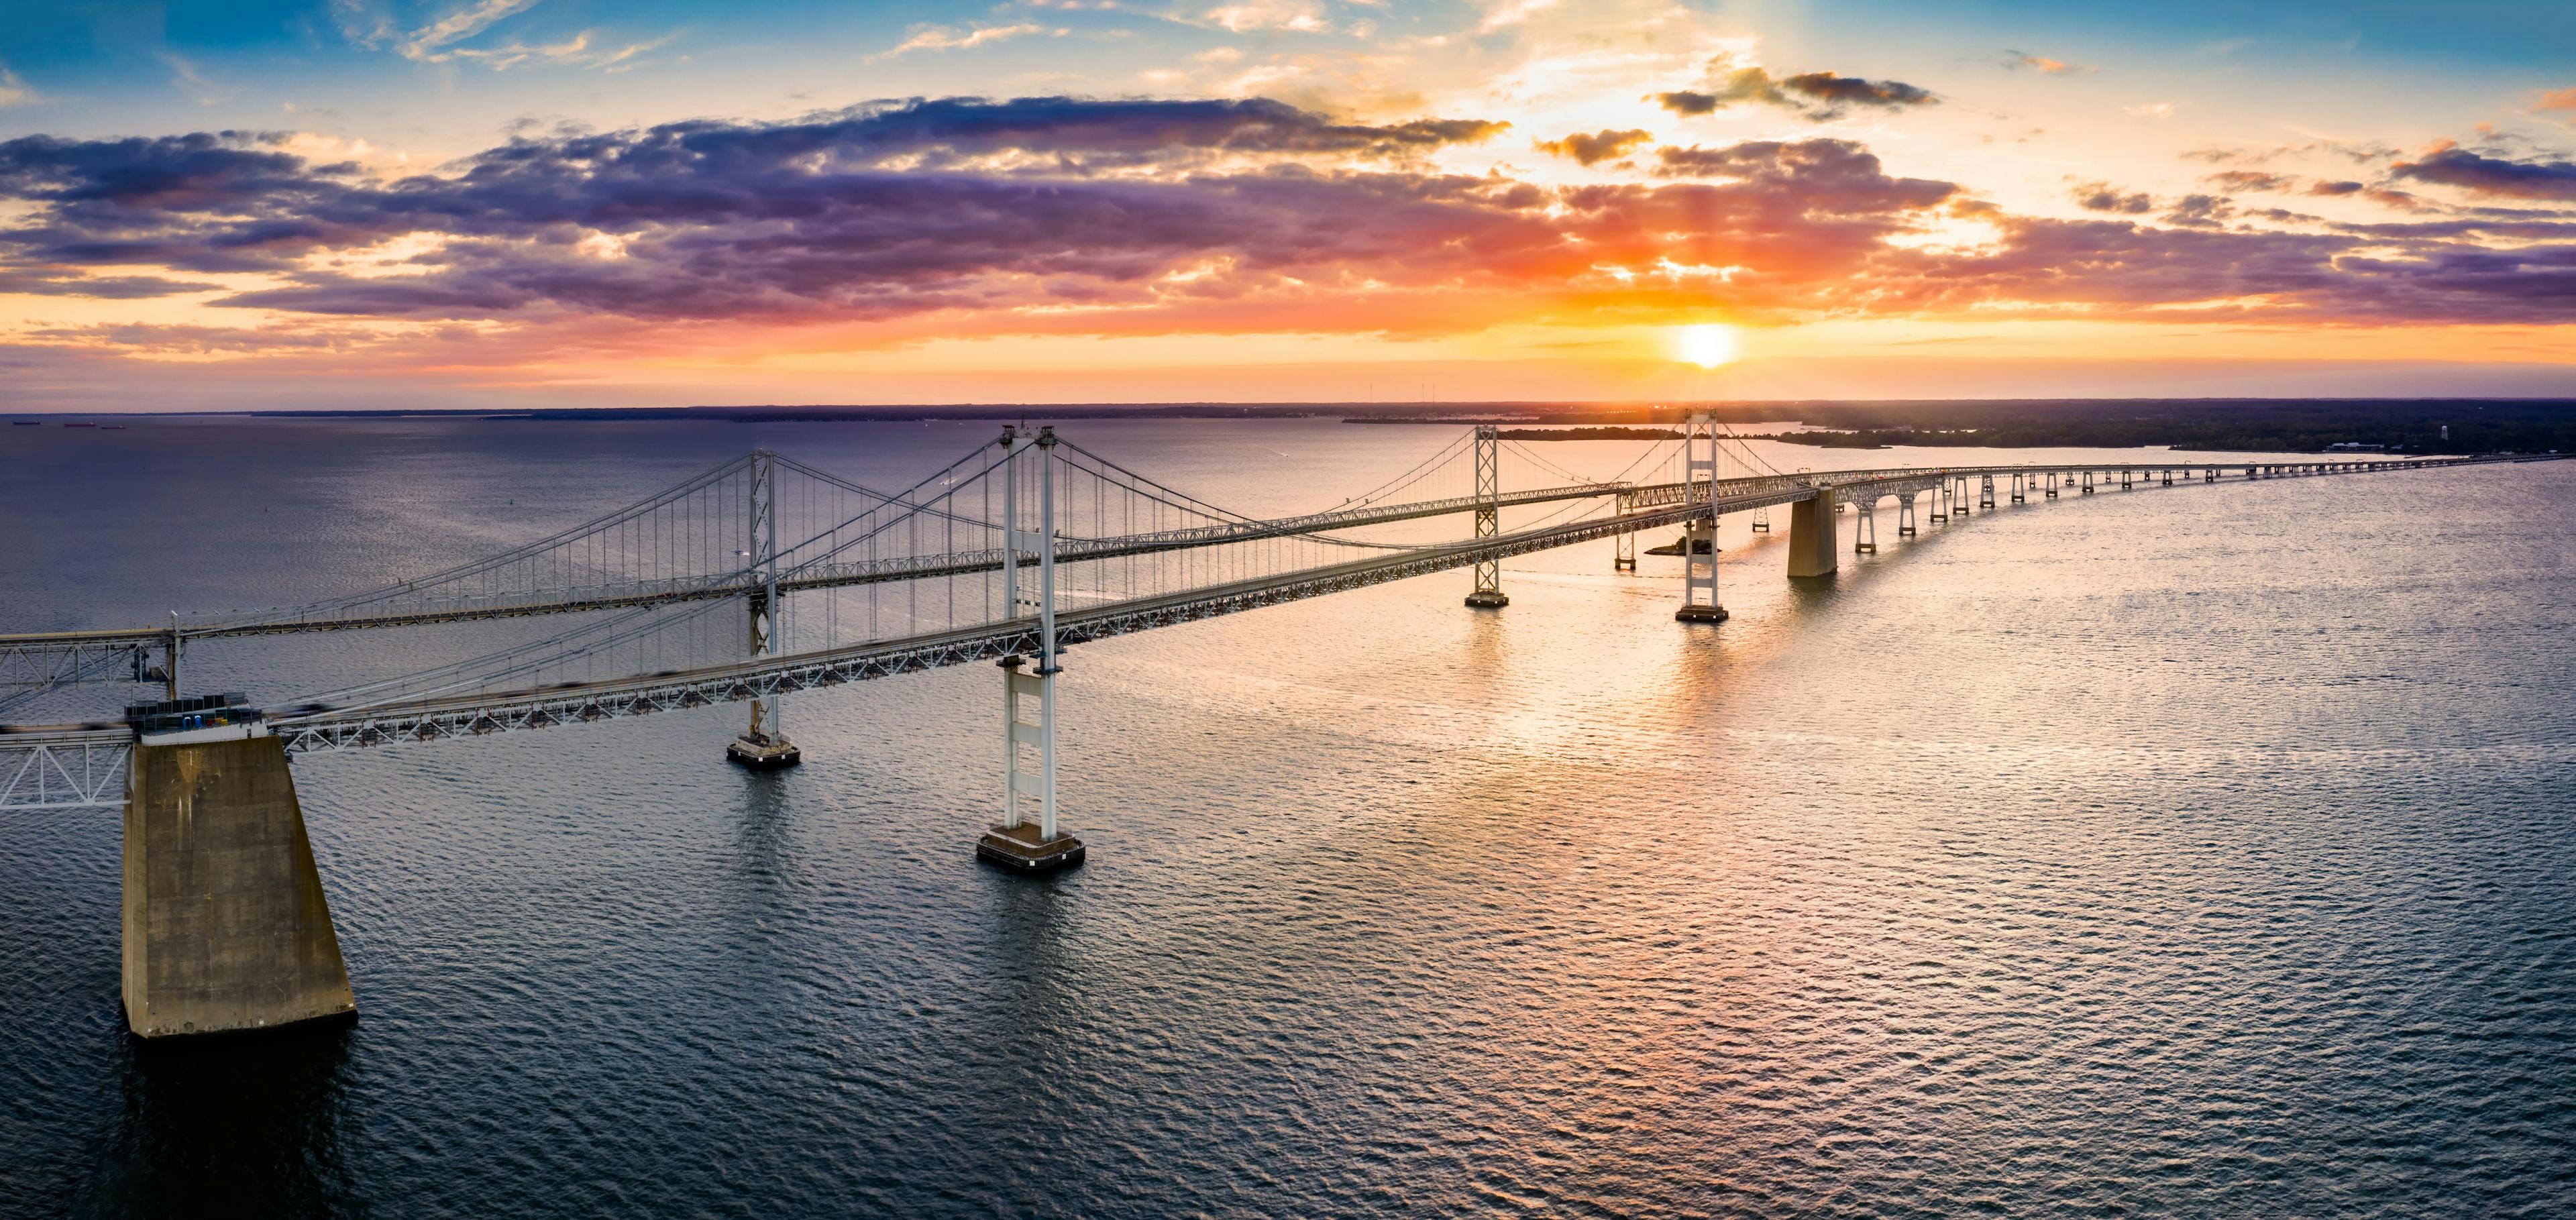 The Chesapeake Bay Bridge from the side, with water at sunset